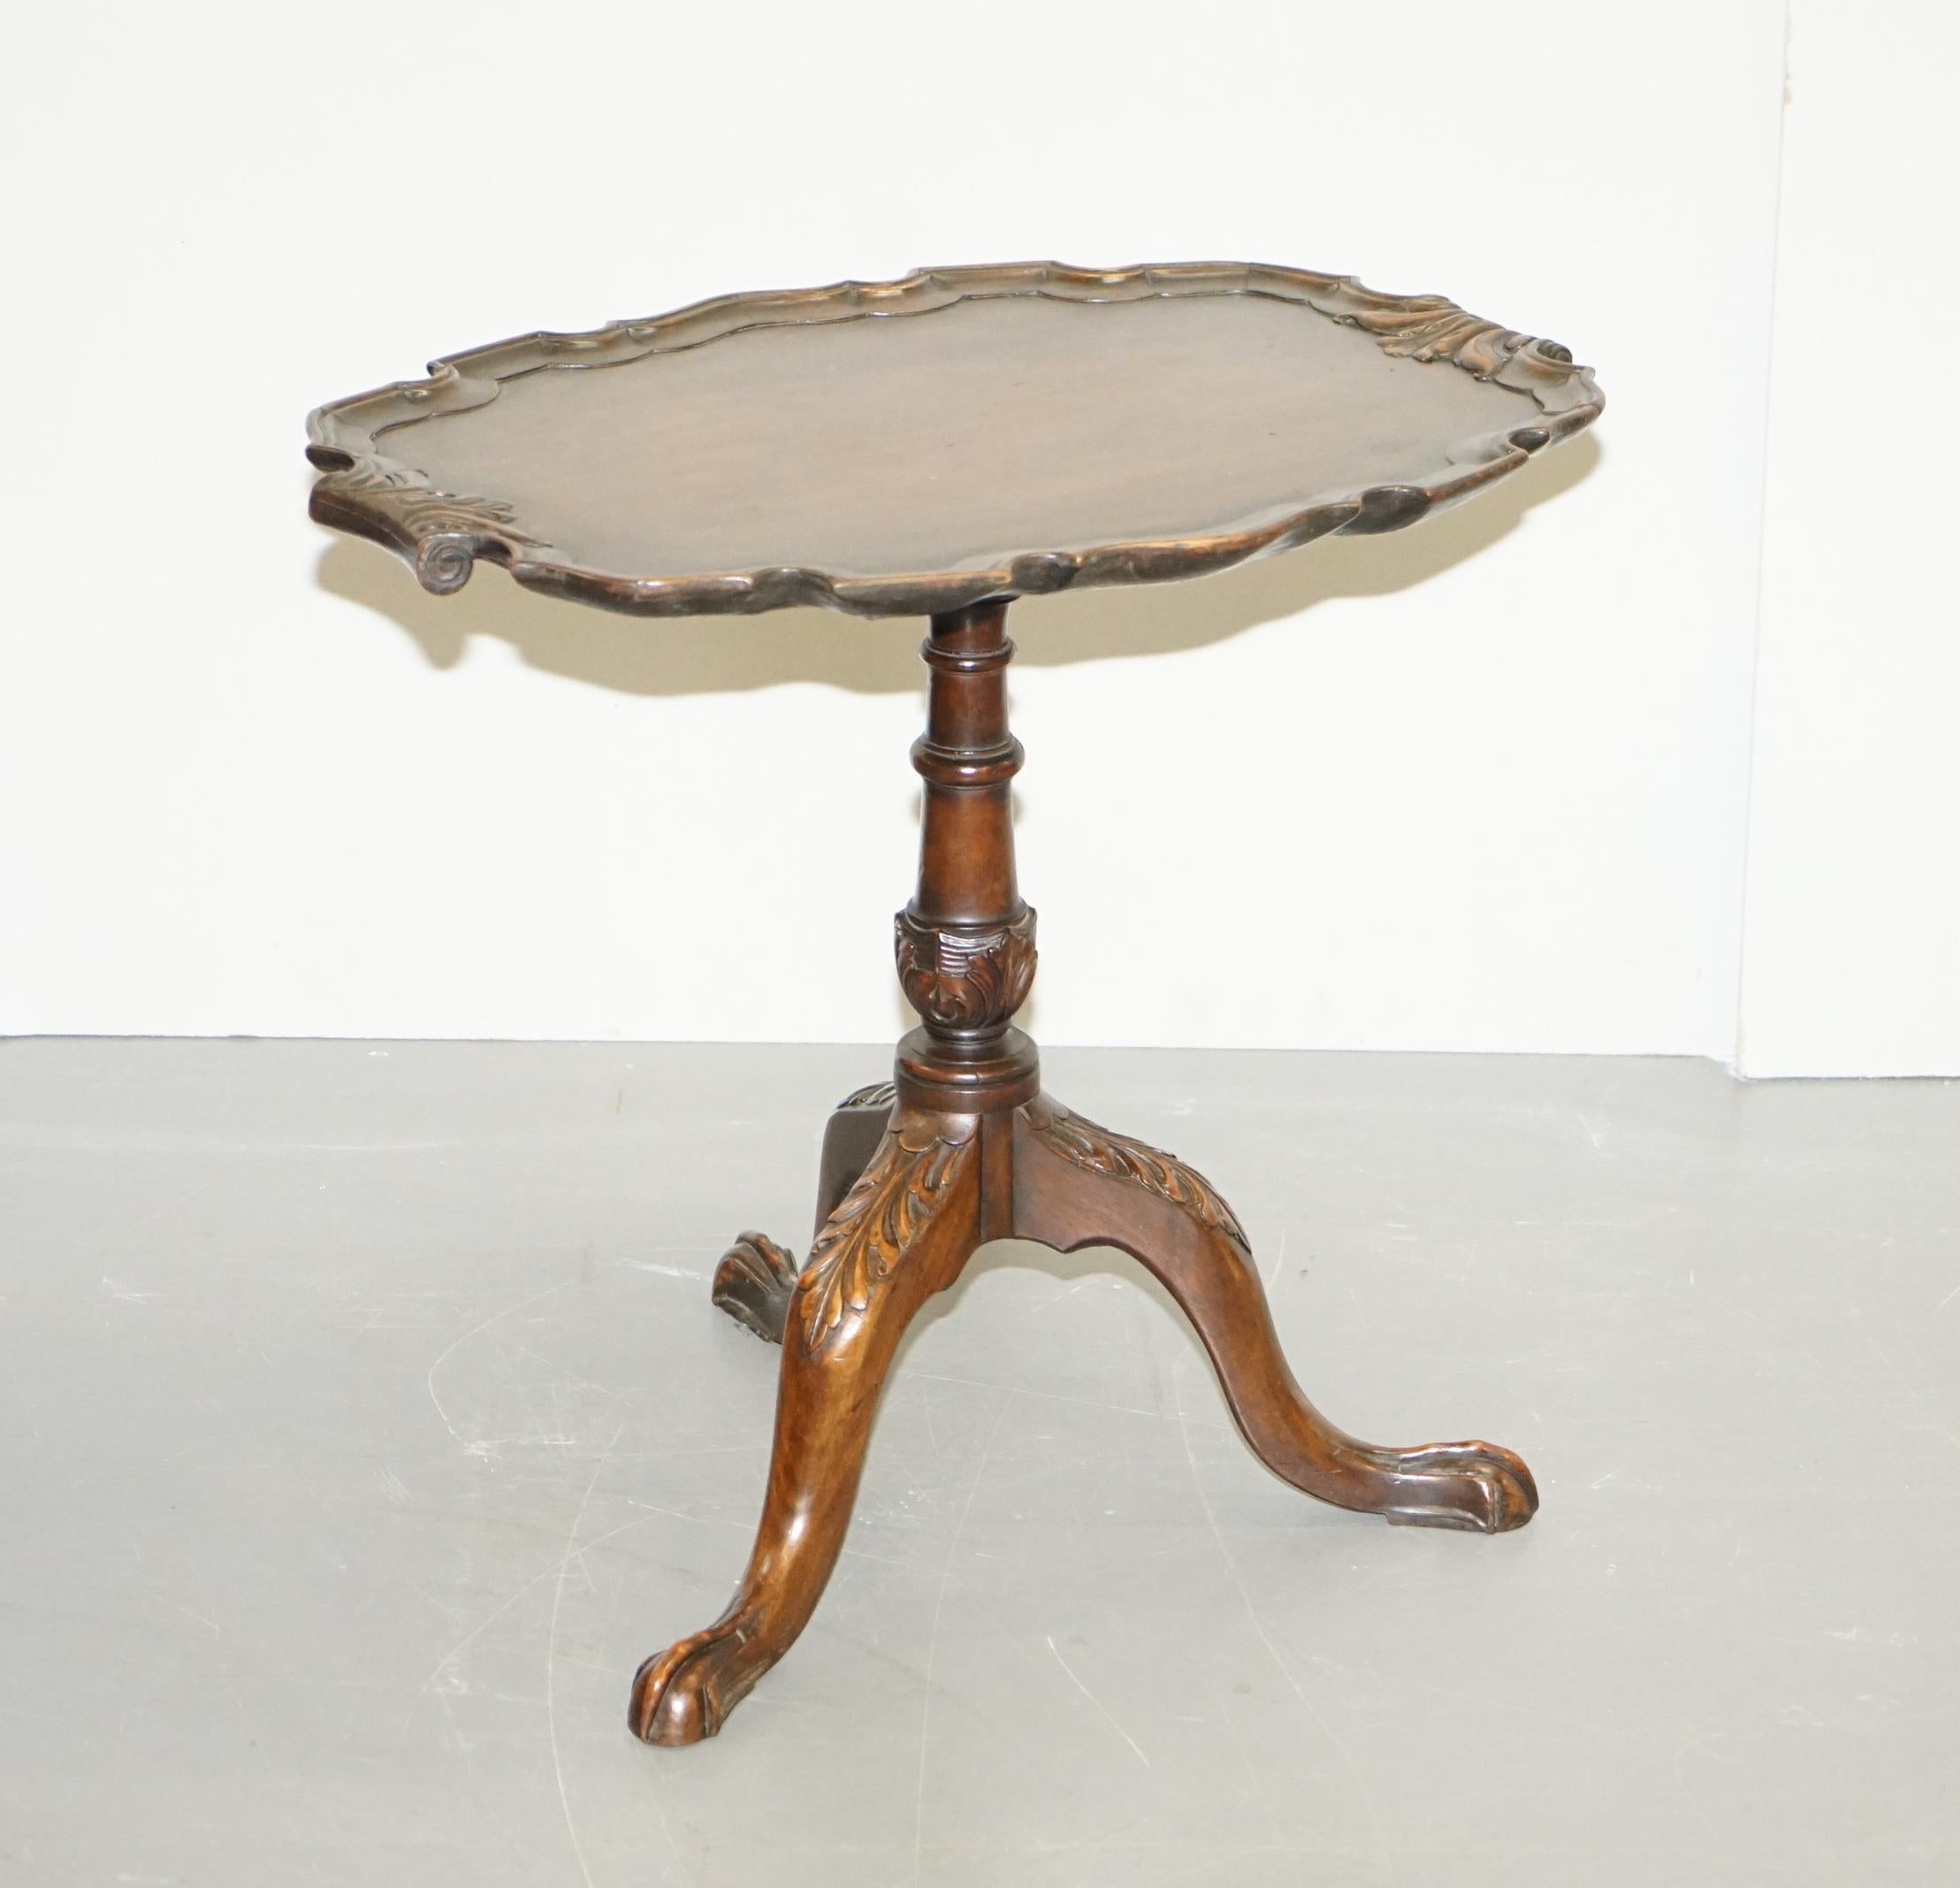 We are delighted to offer for sale this early Victorian circa 1840 hand carved mahogany tilt top tripod table in the manner of Gillows

A very good looking well made and collectable table. The top is beautifully carved and extremely ornate, just